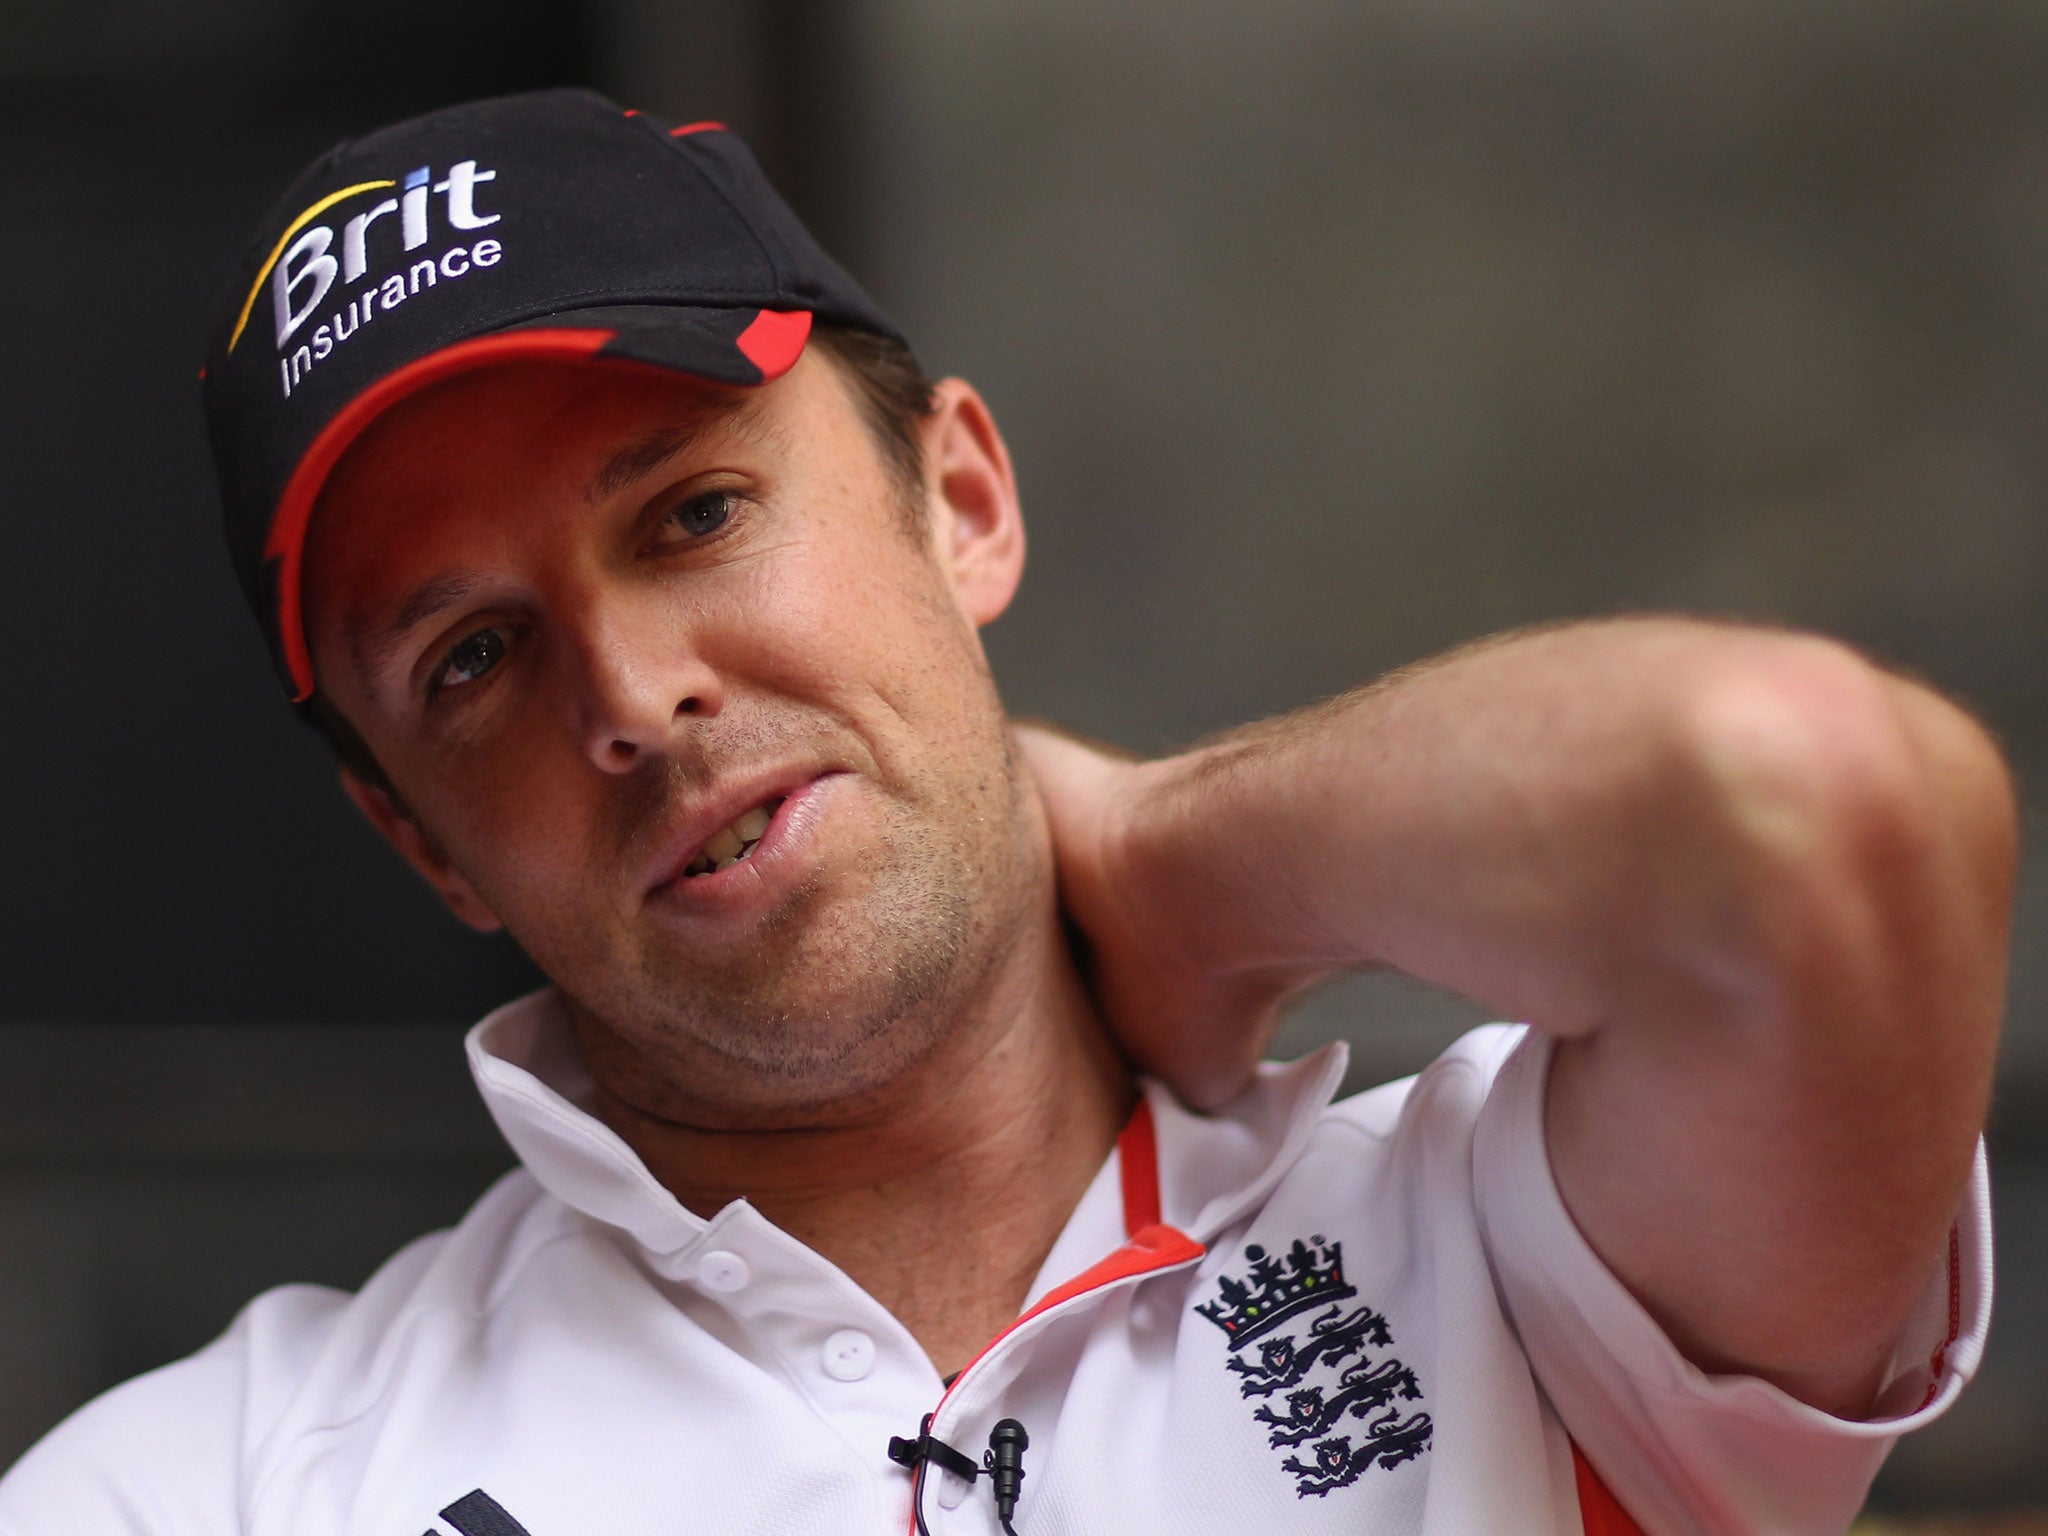 Graeme Swann is England’s most prolific off-spinner of all time